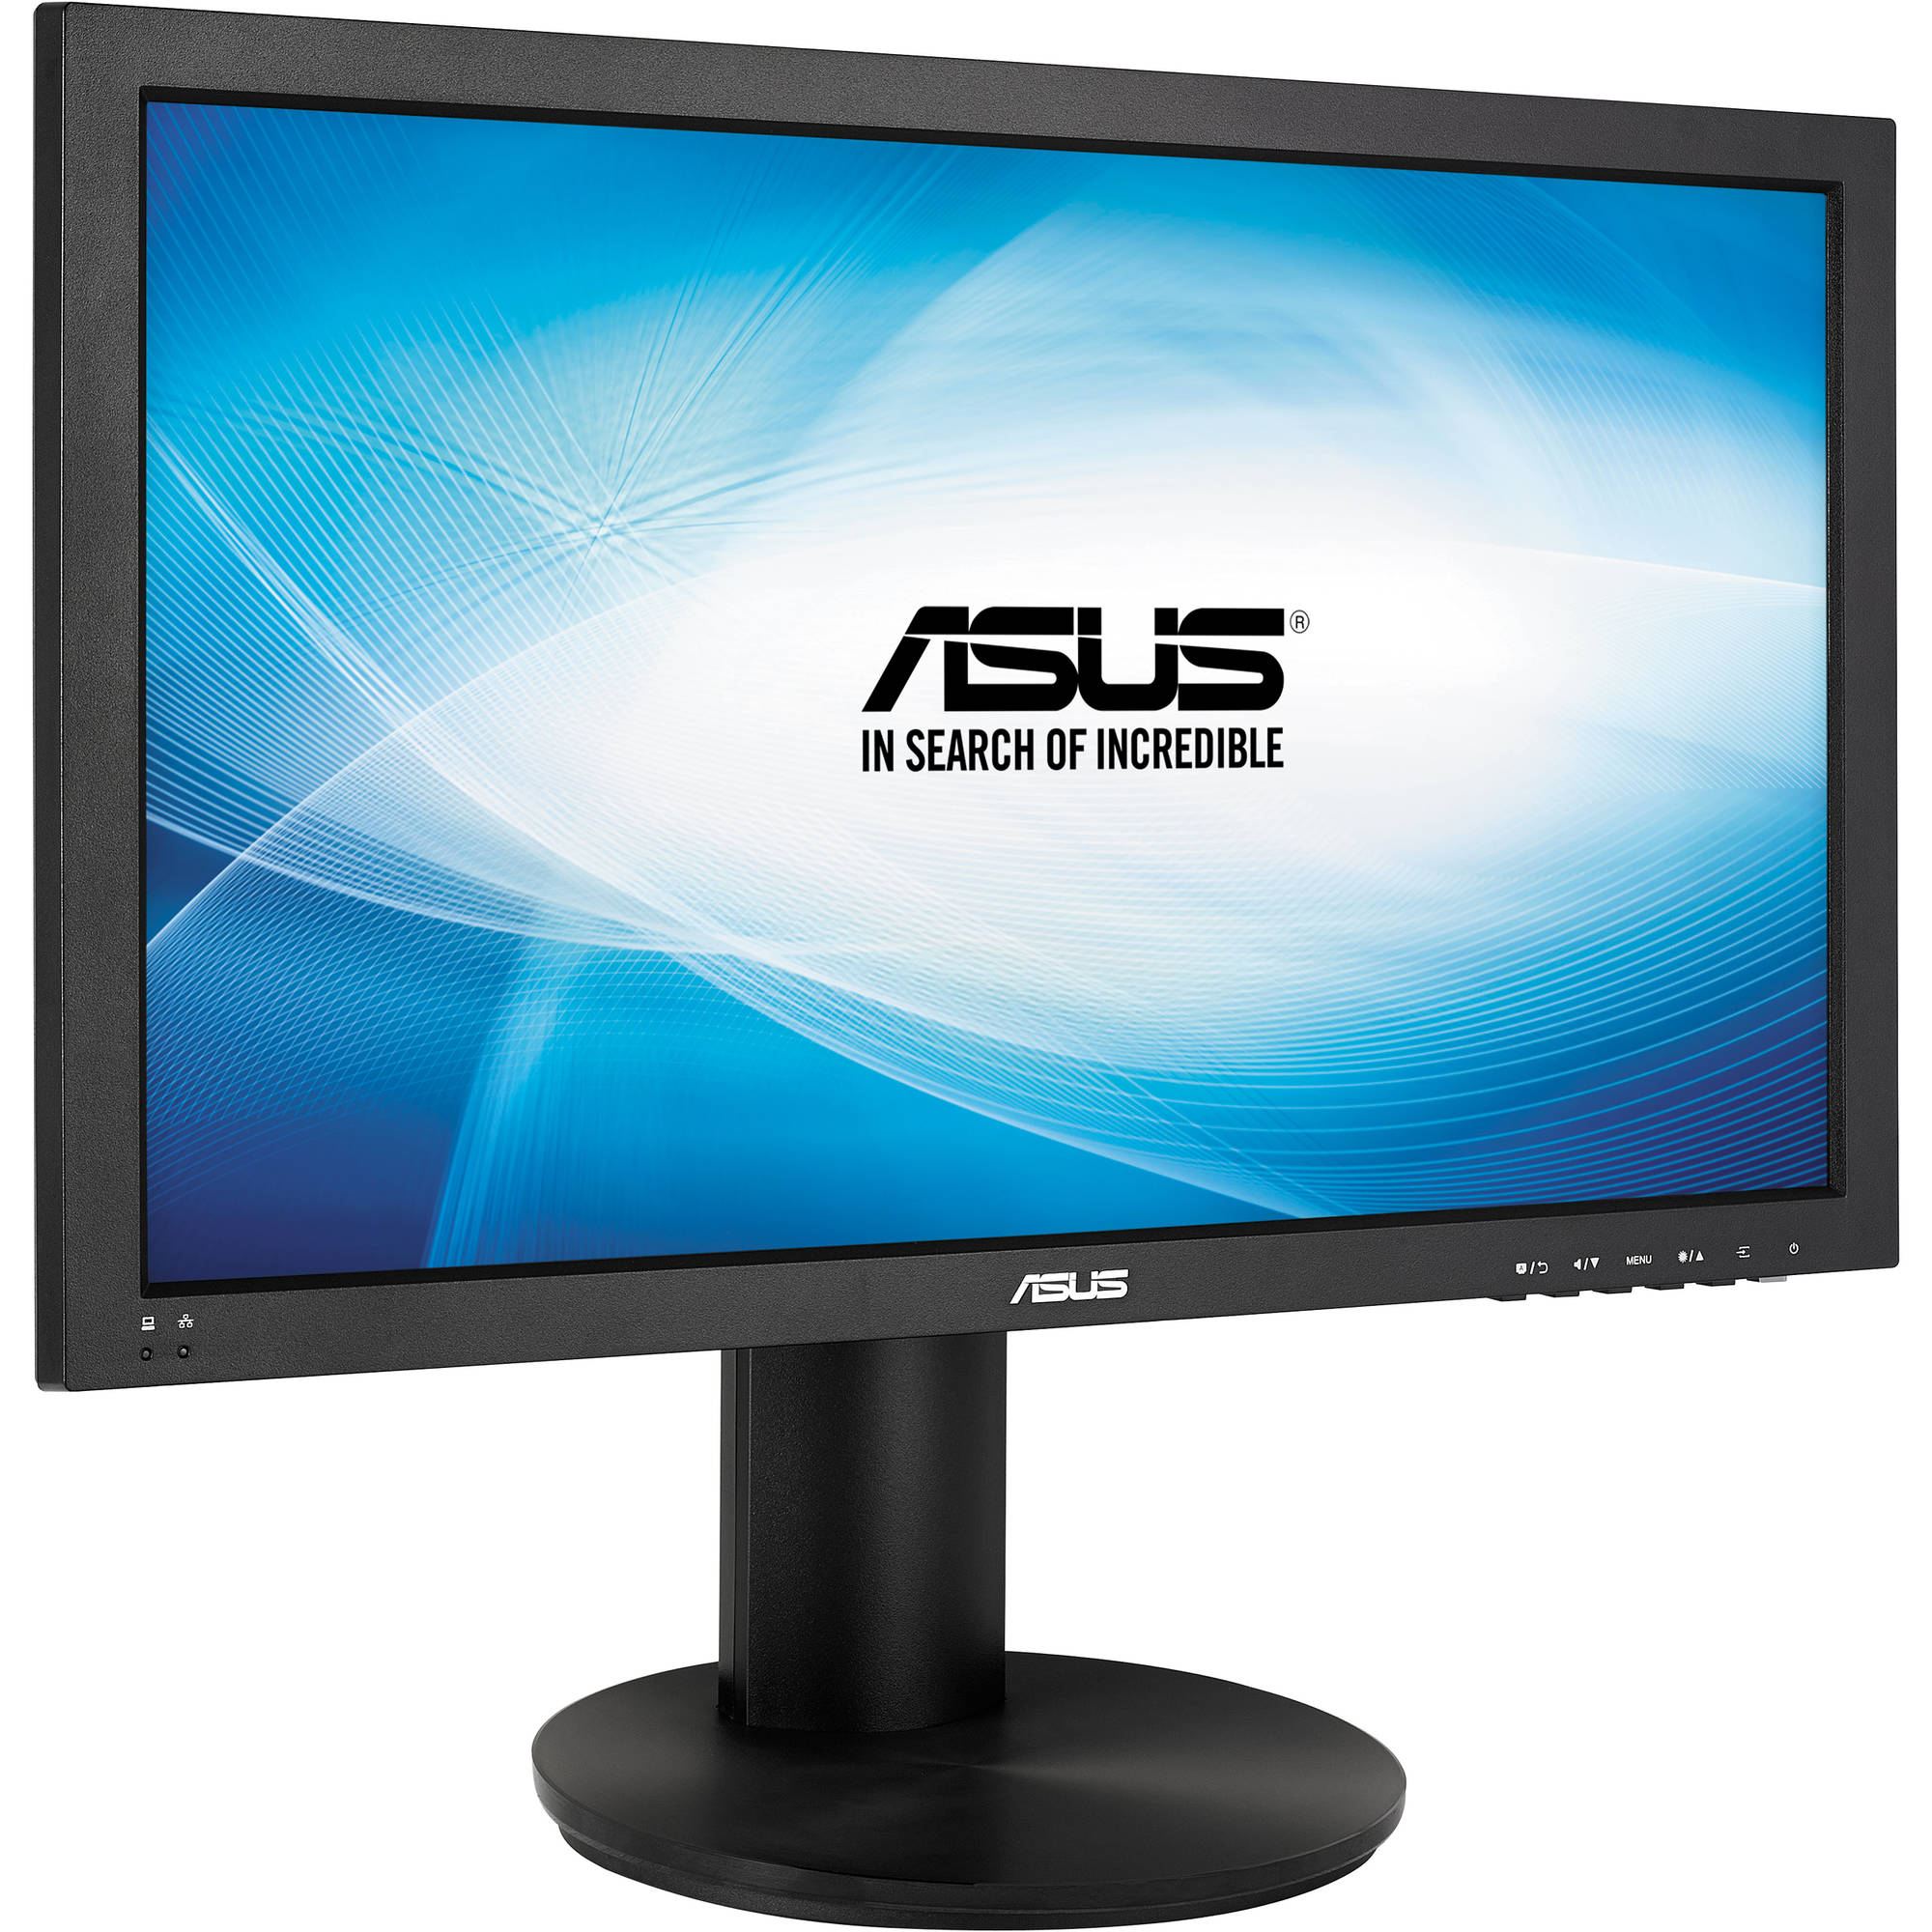 ASUS CP220-A Zero Client 22" LED Monitor 1920x1080 - Certified Refurbished